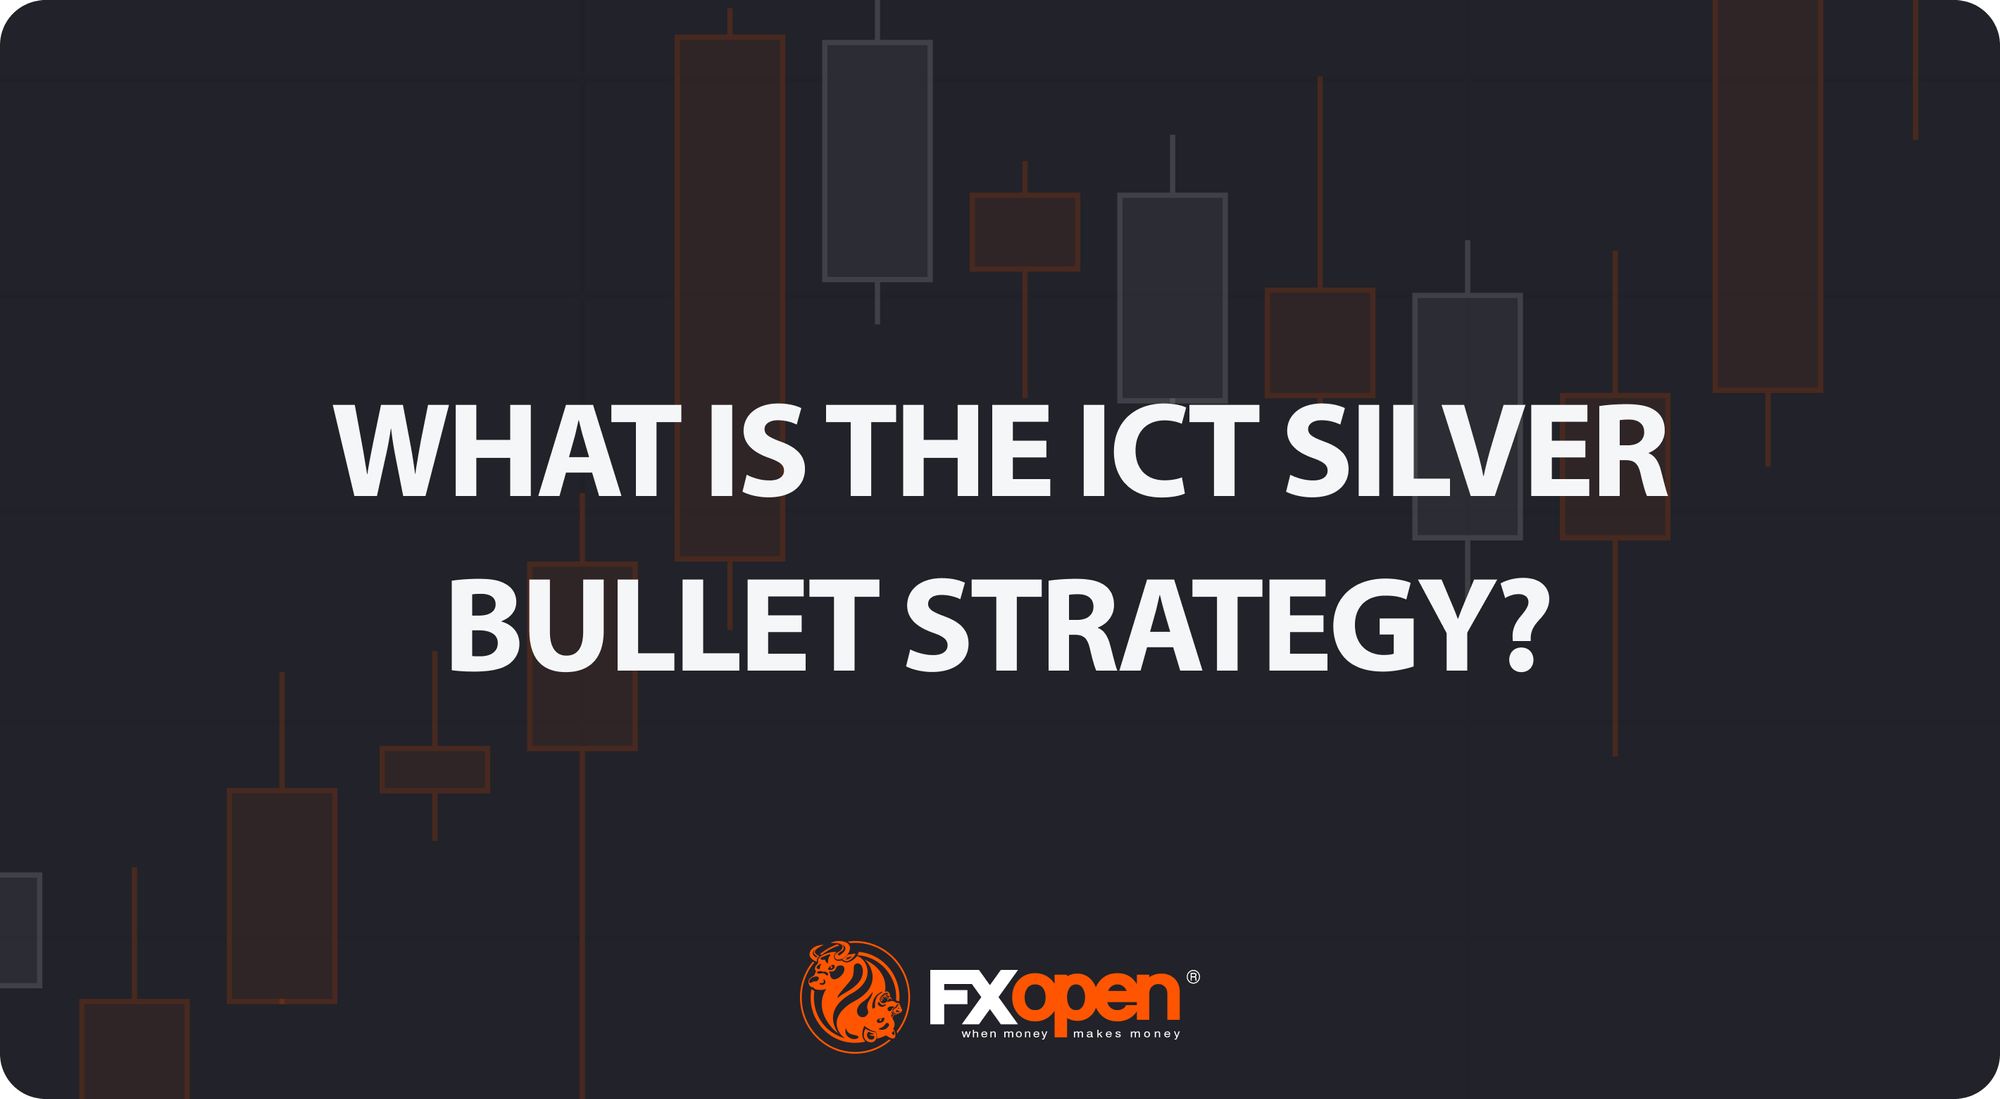 What Is the ICT Silver Bullet Strategy, and How Does It Work?